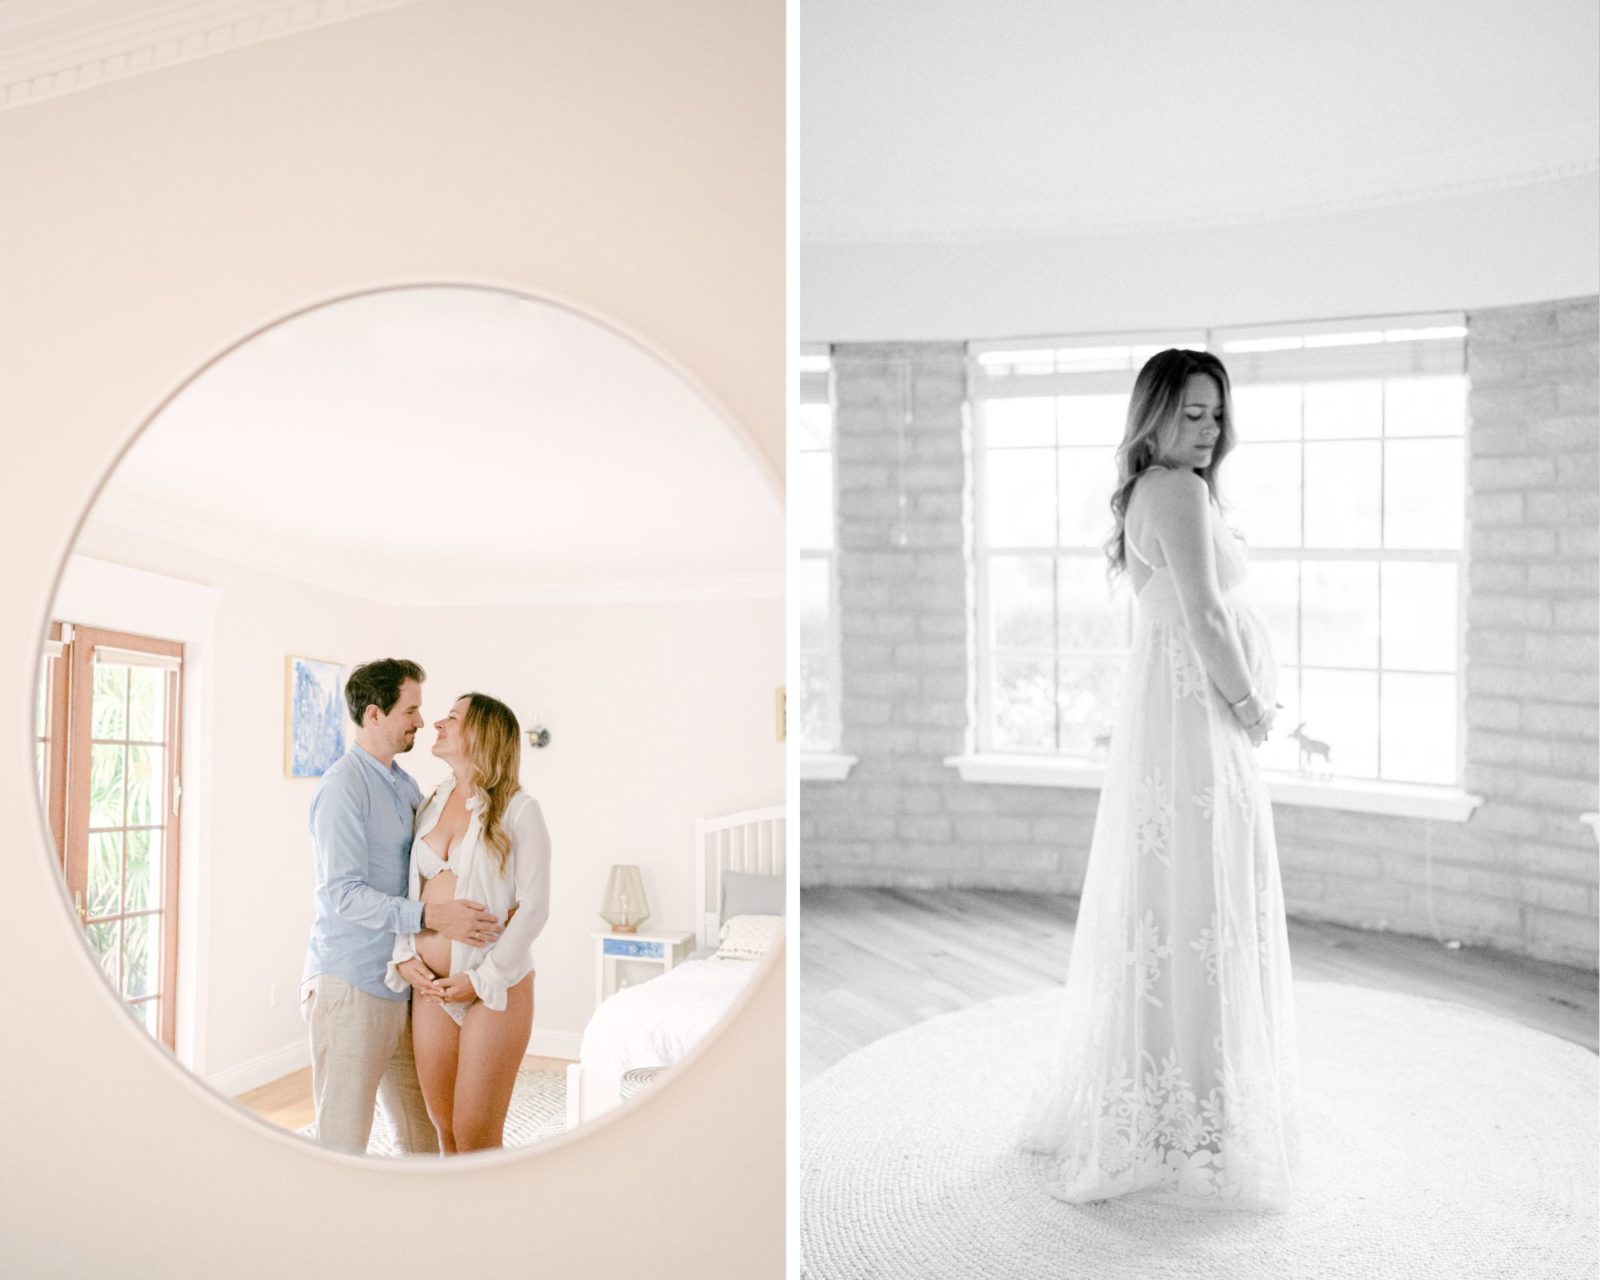 At home maternity photos with mirror